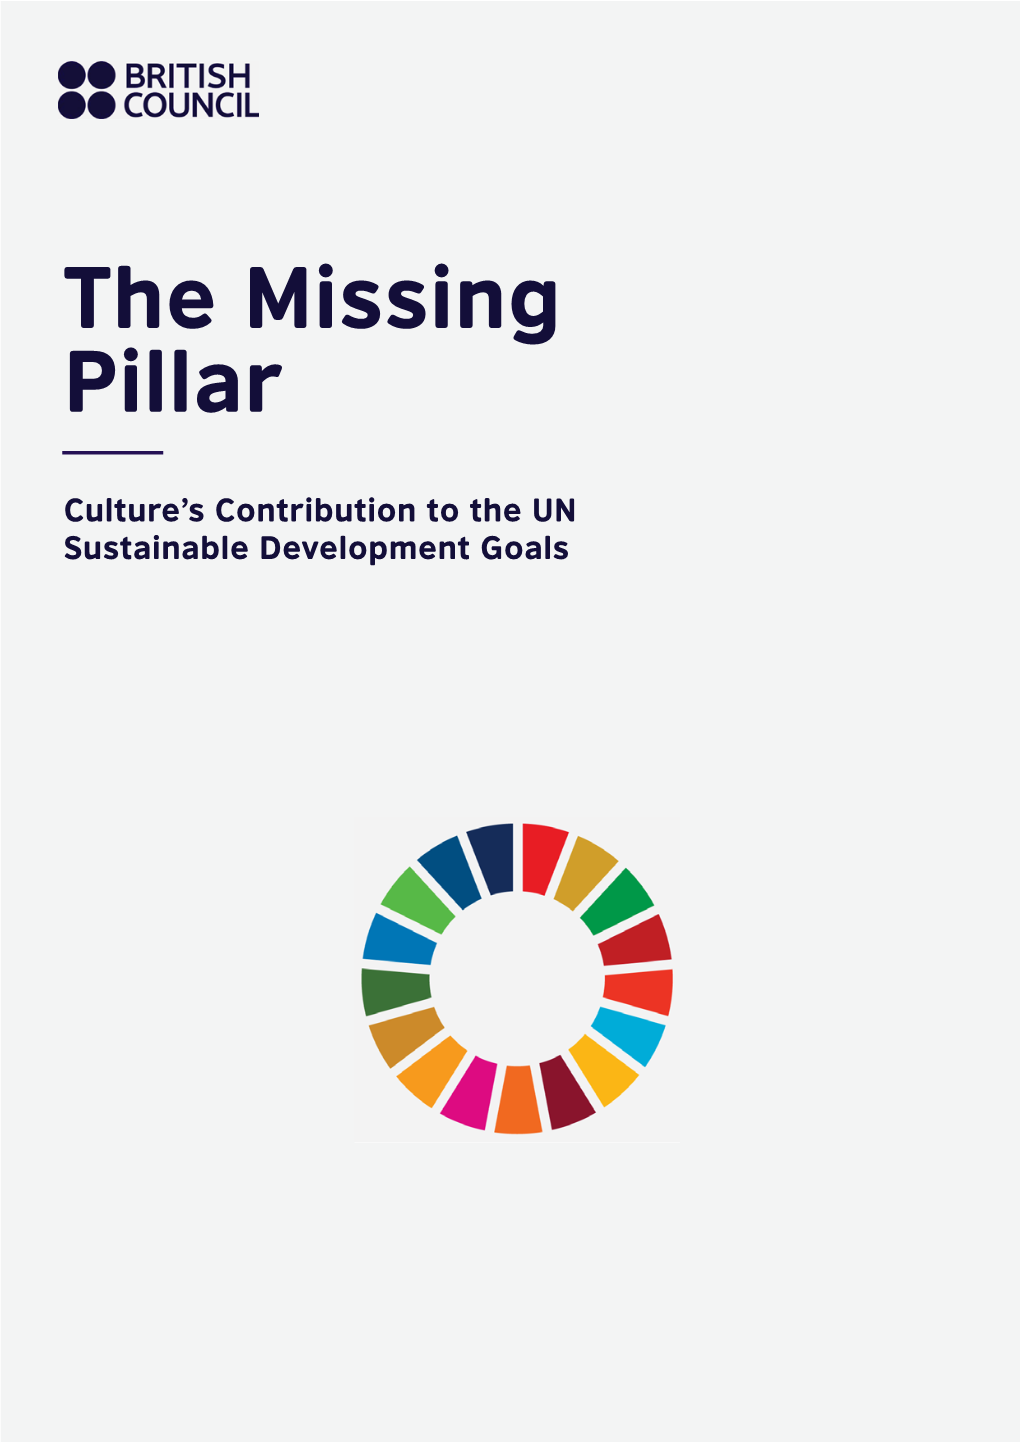 The Missing Pillar: Culture's Contribution to the UN Sustainable